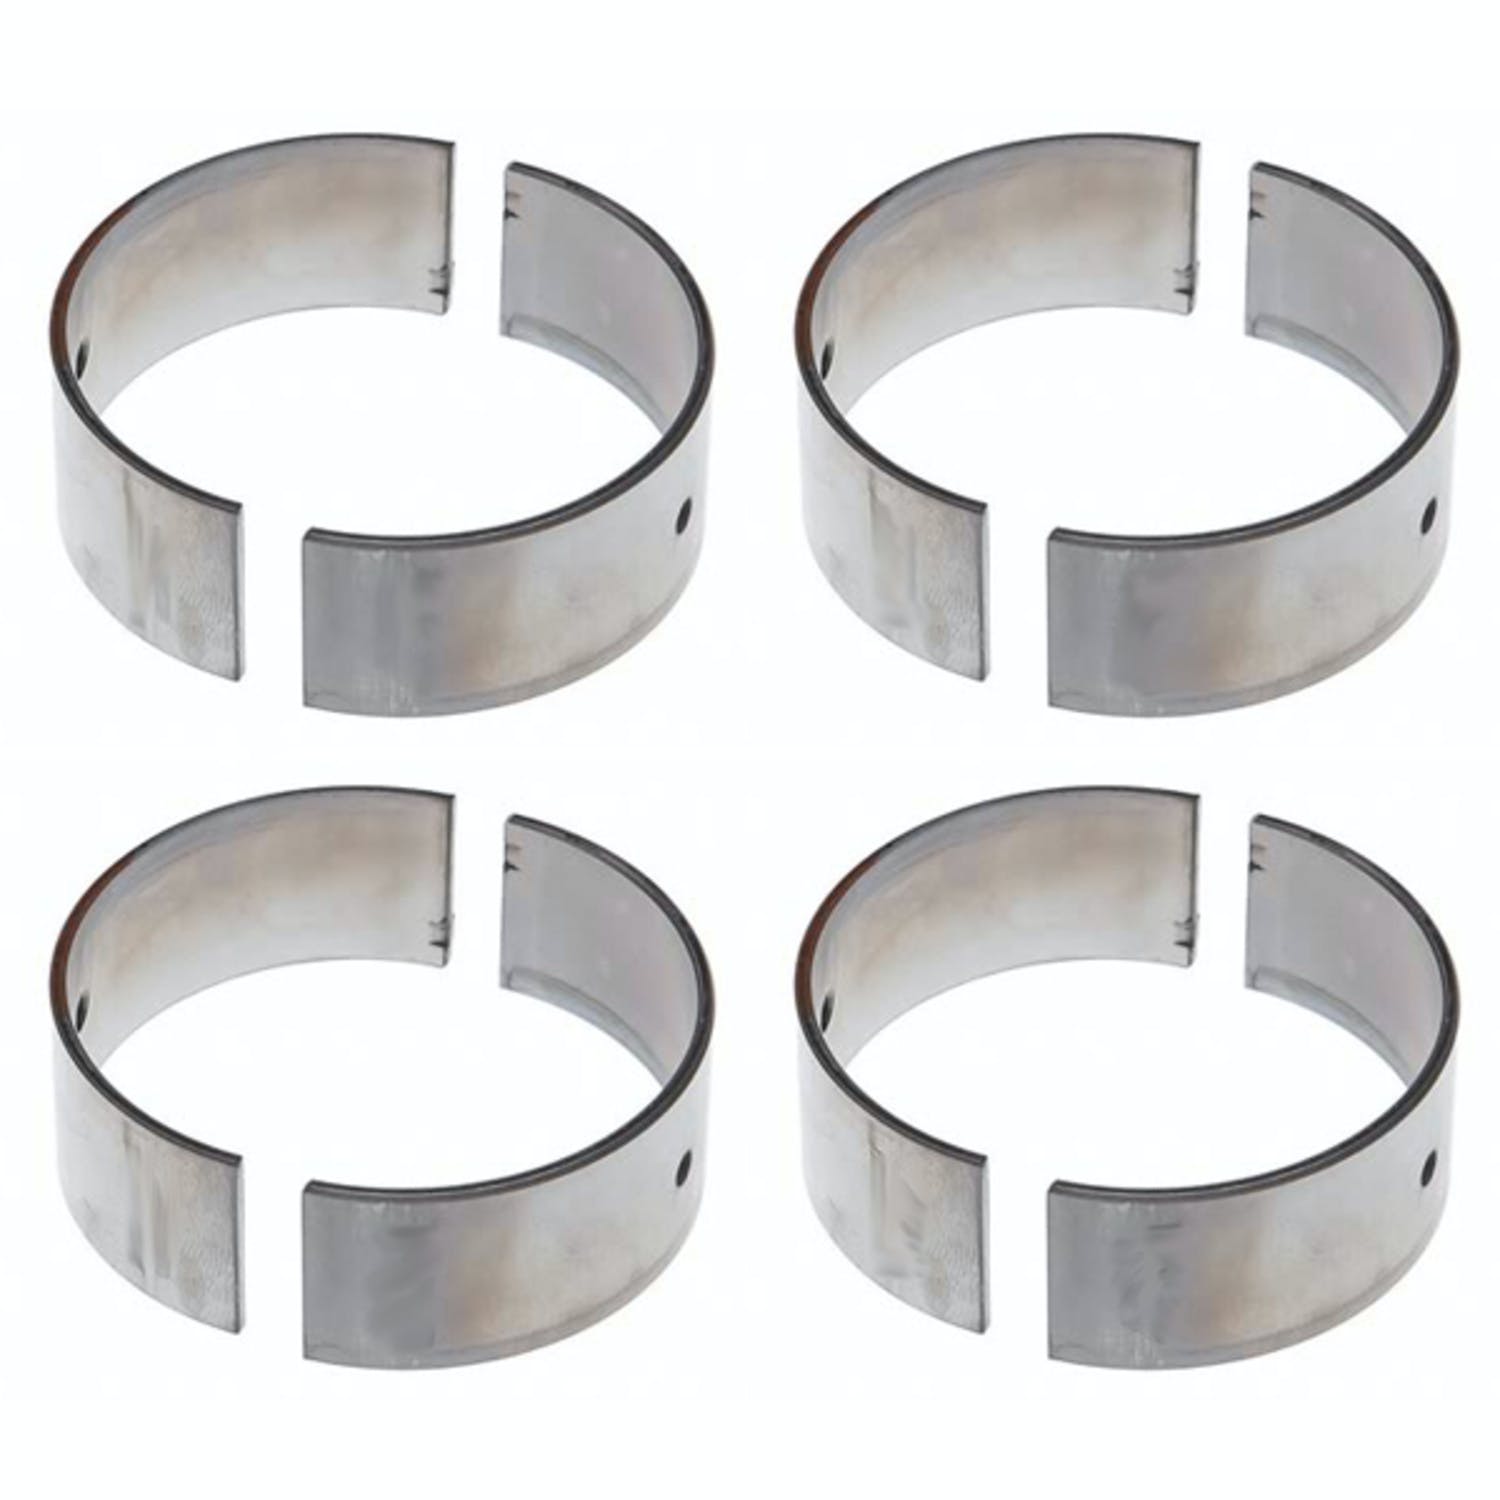 Omix-ADA 17467.64 Connecting Rod Bearing